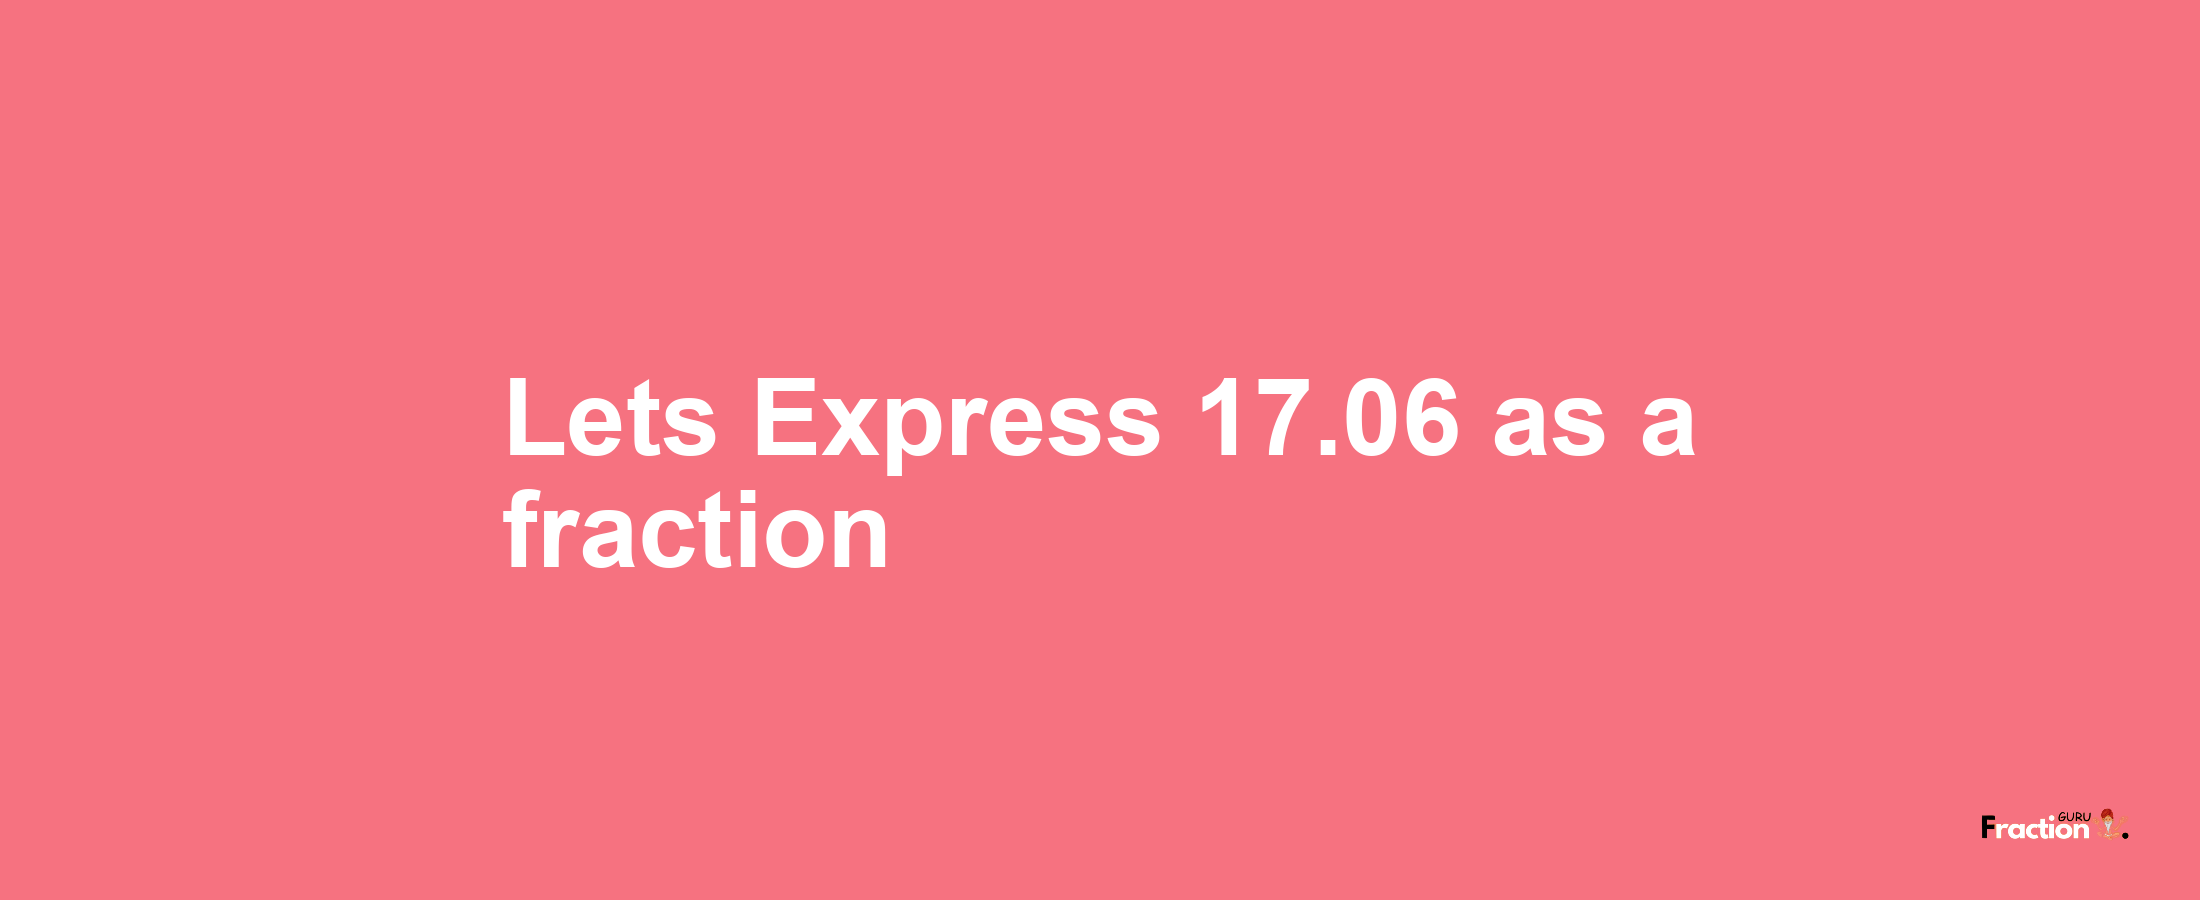 Lets Express 17.06 as afraction